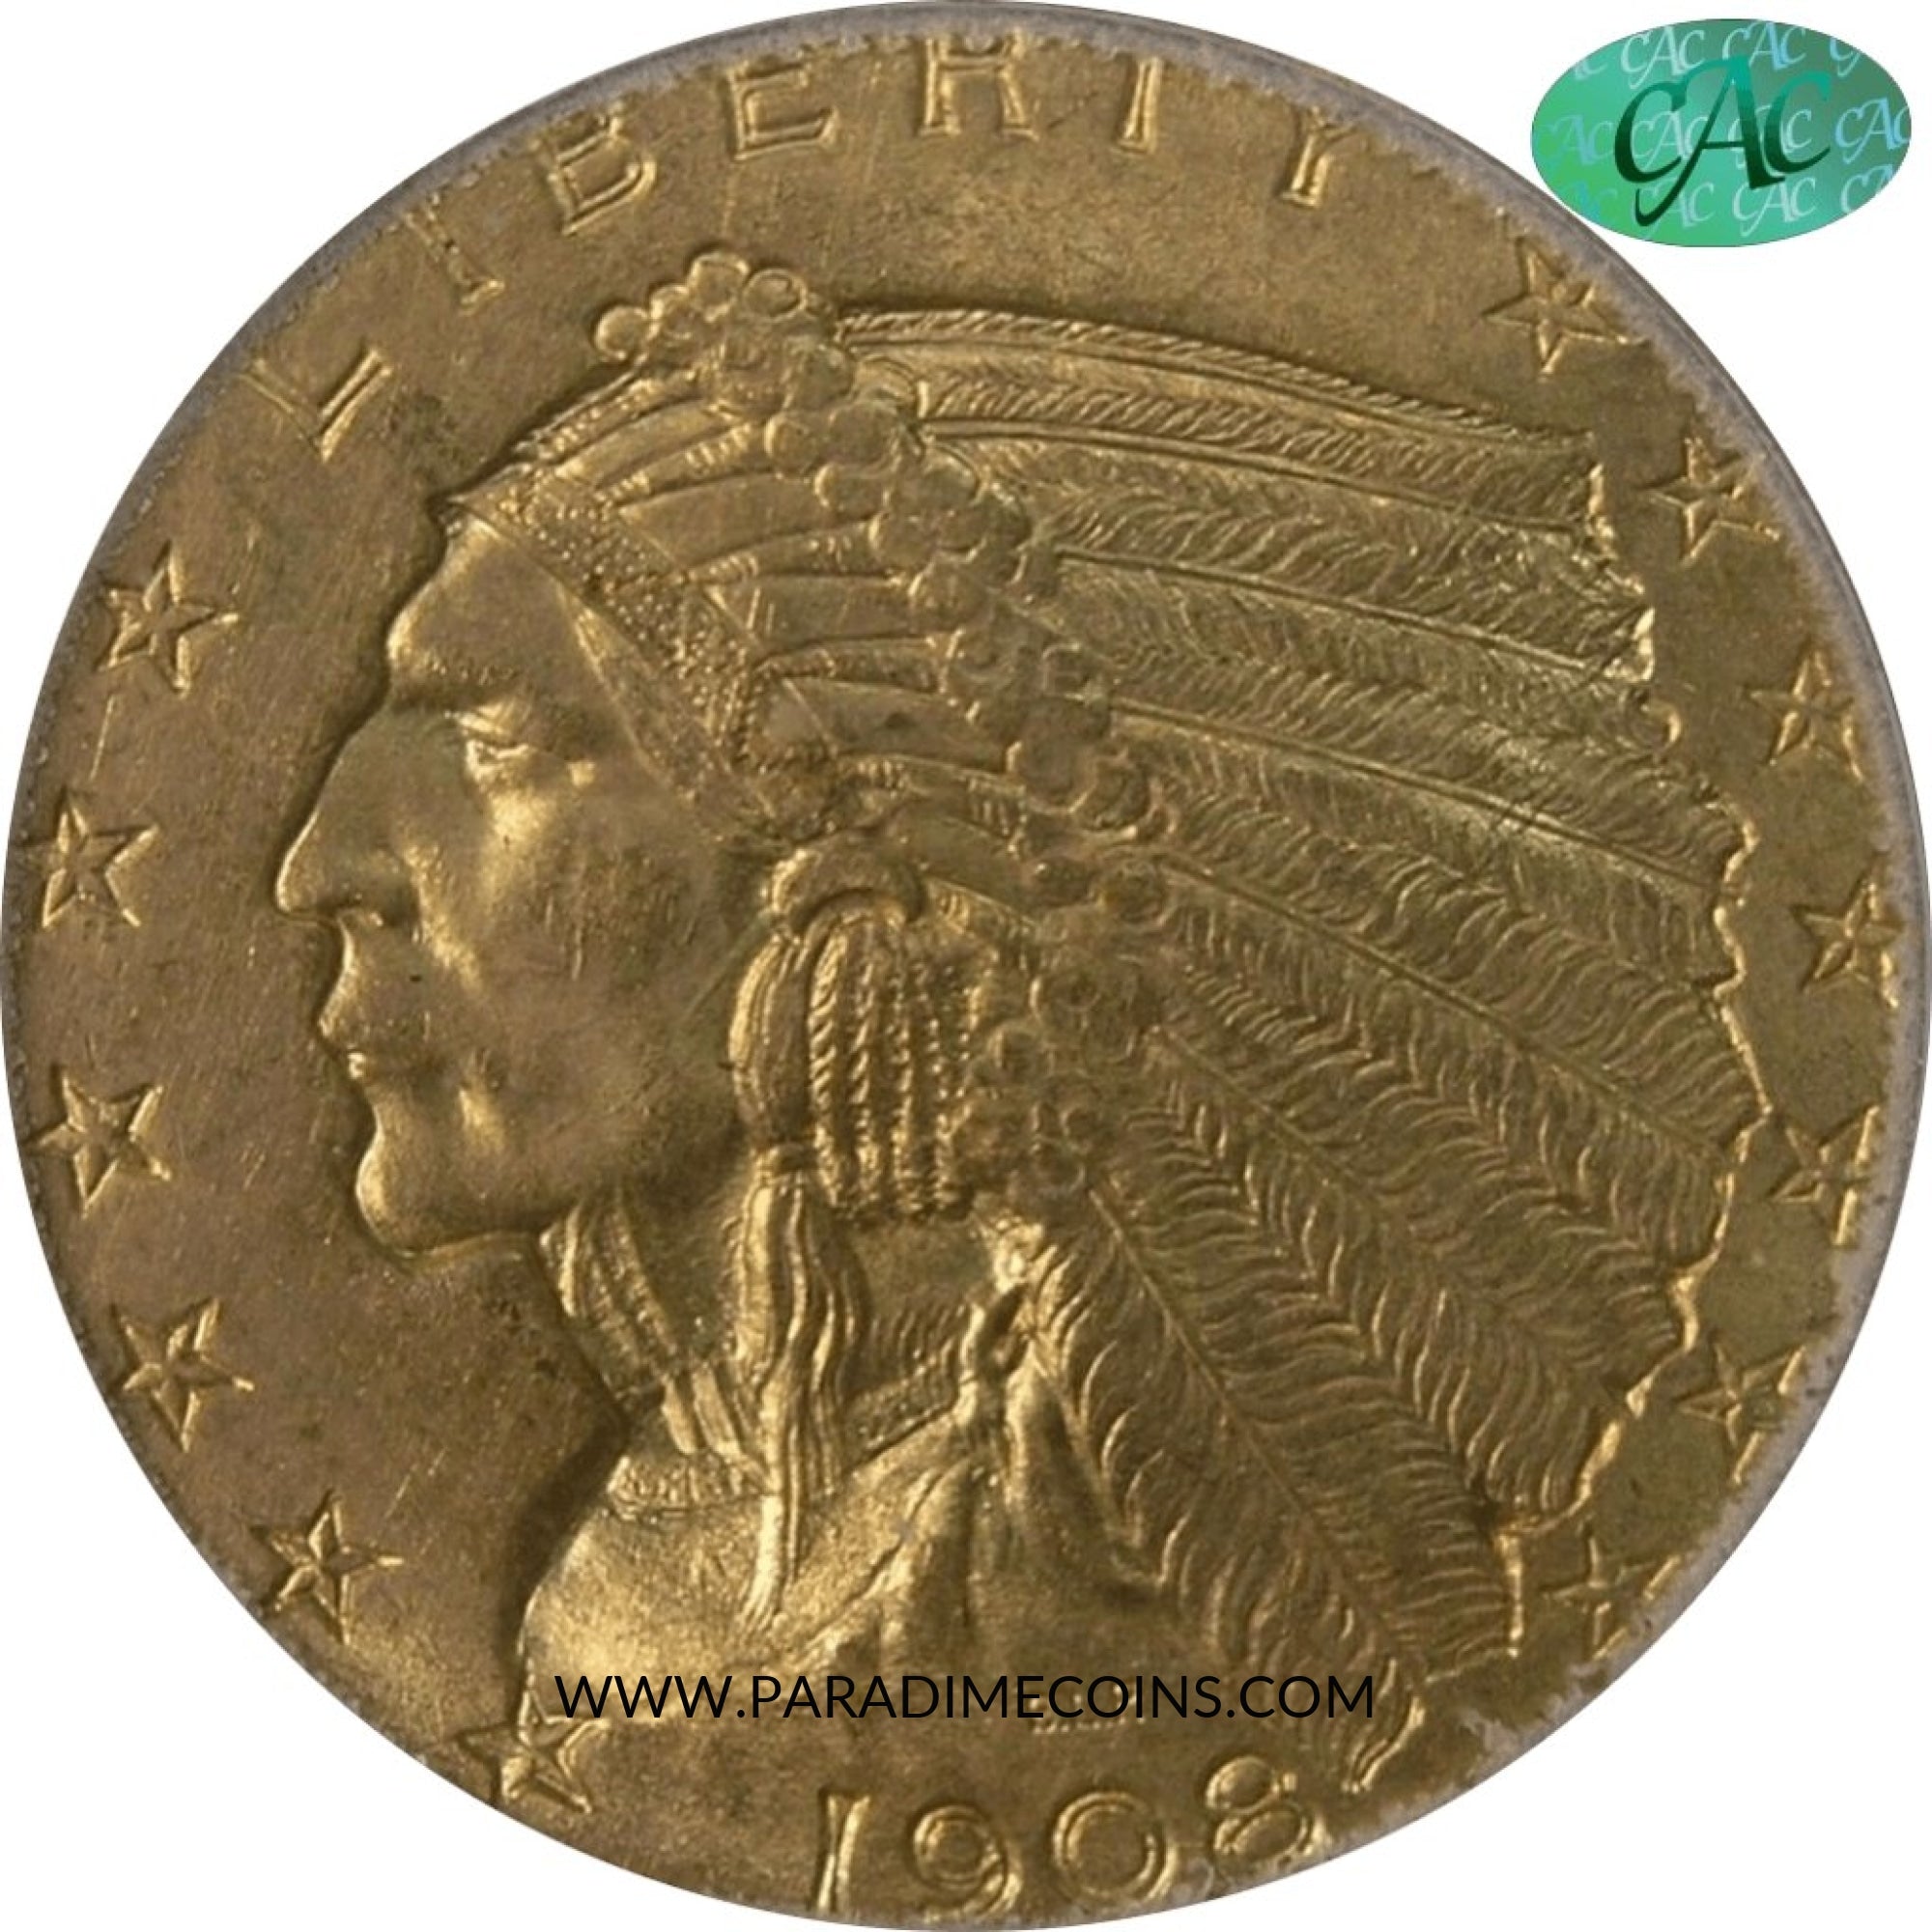 1908 $2.5 MS64 PCGS CAC. - Paradime Coins | PCGS NGC CACG CAC Rare US Numismatic Coins For Sale